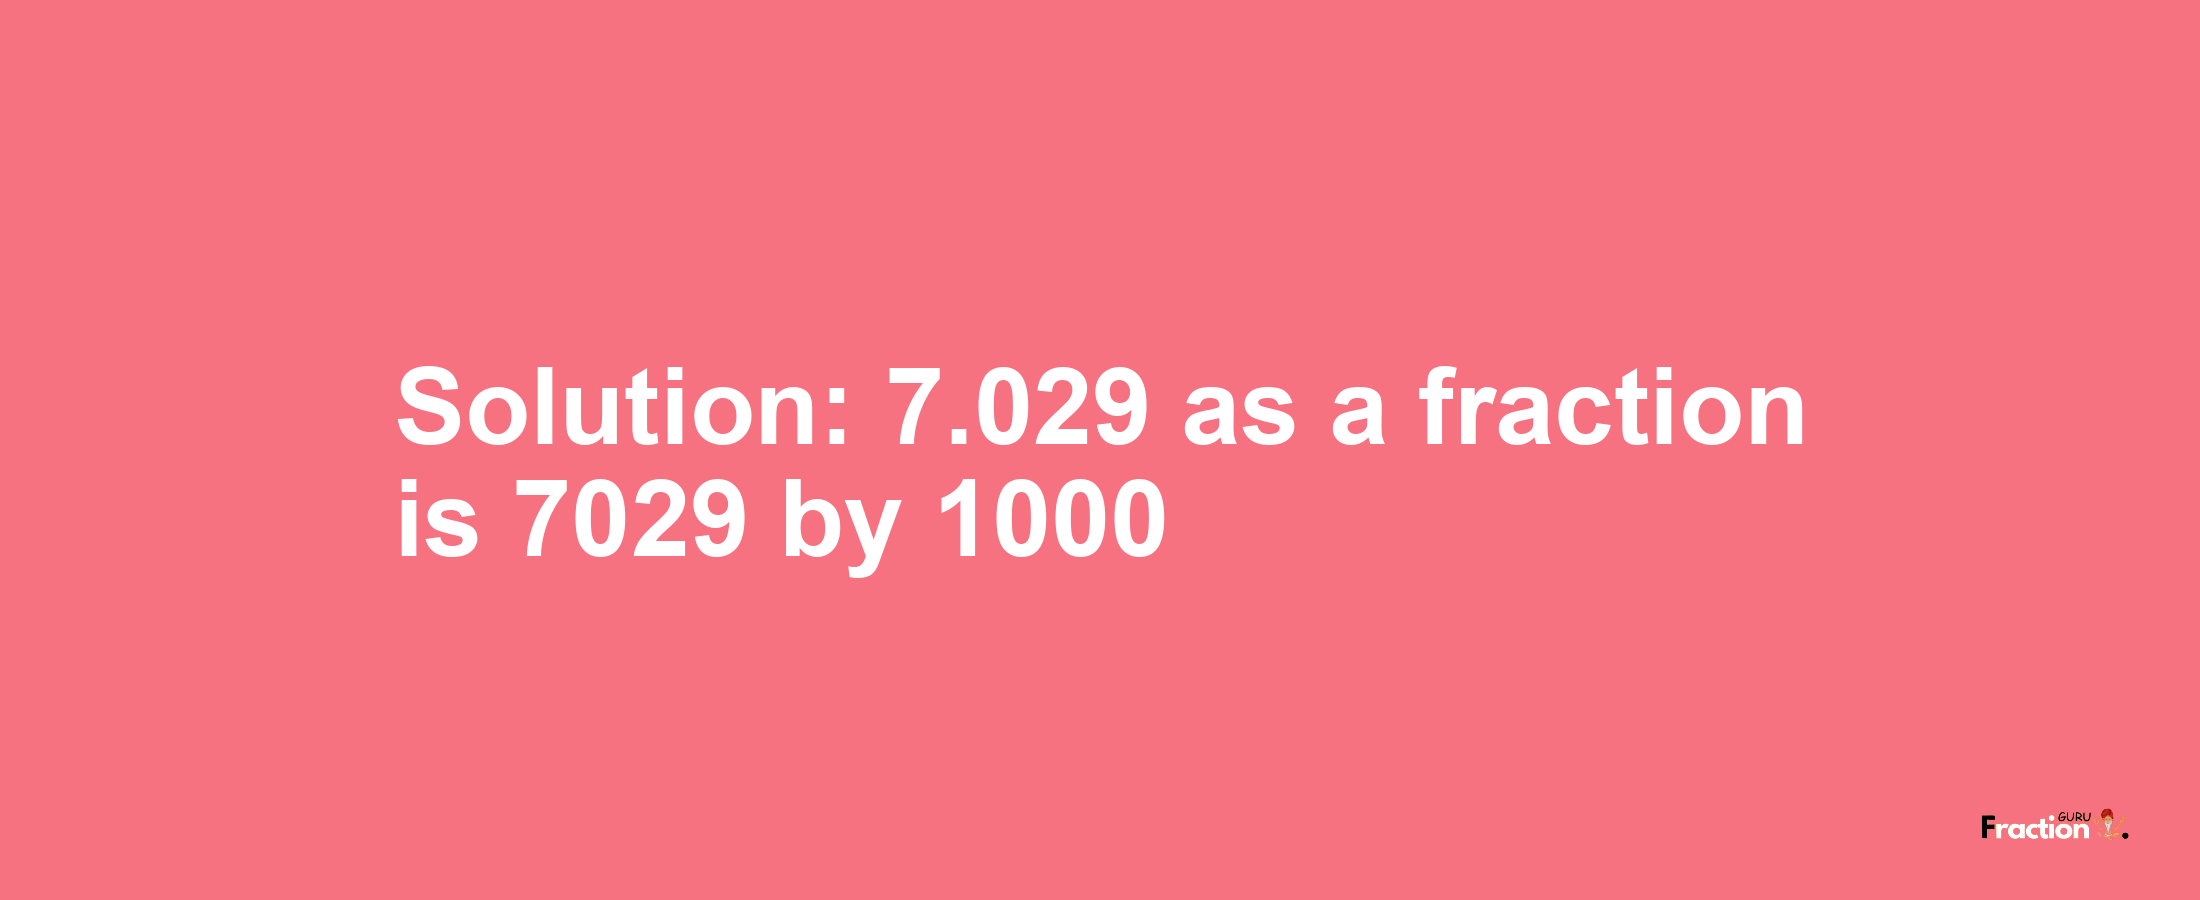 Solution:7.029 as a fraction is 7029/1000